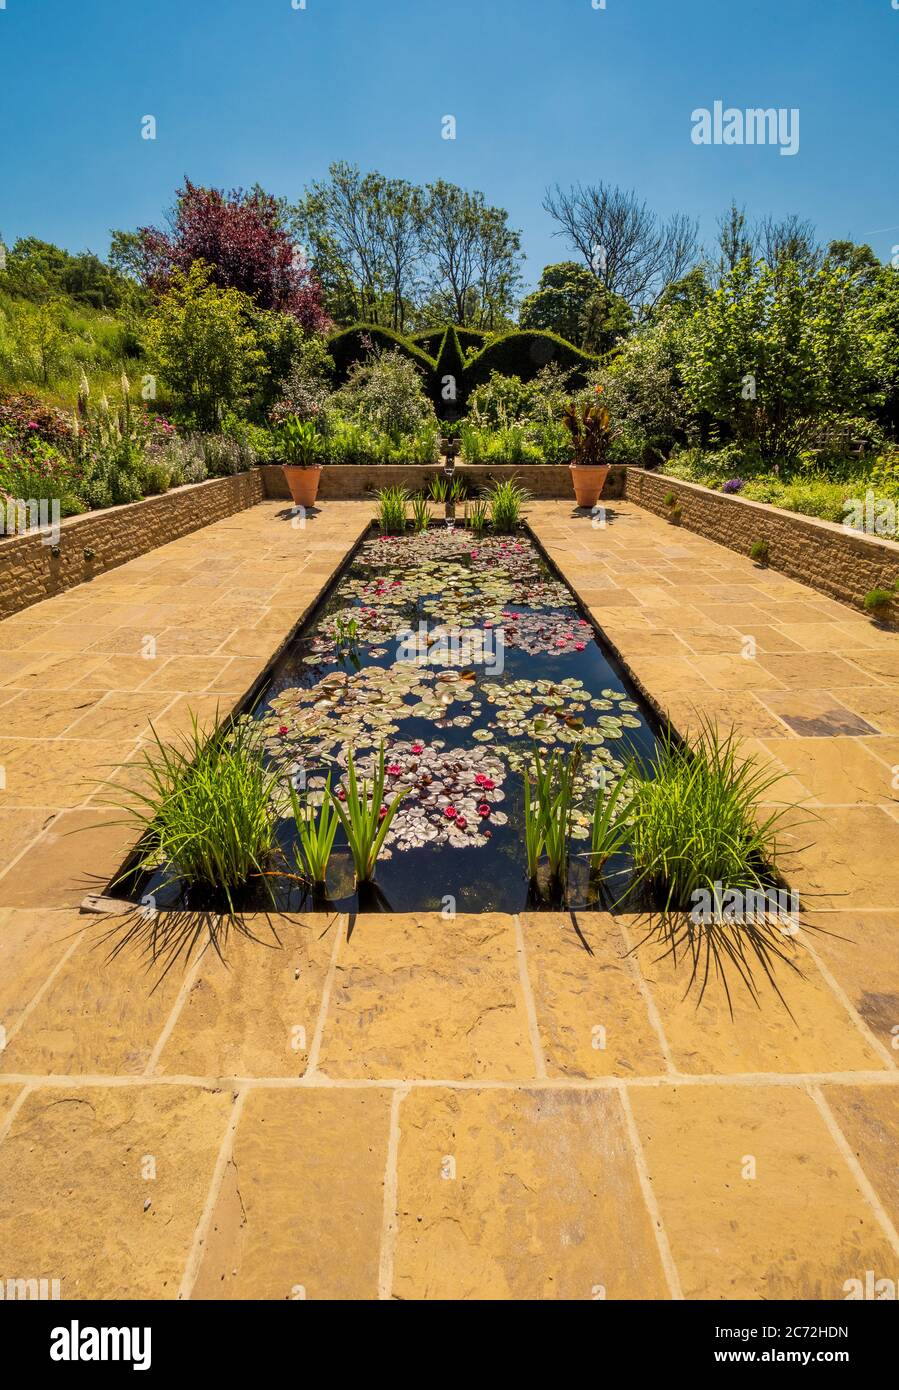 The rectangular pool of the Edwardian garden at RHS Harlow Carr, Harrogate, North Yorkshire, UK Stock Photo